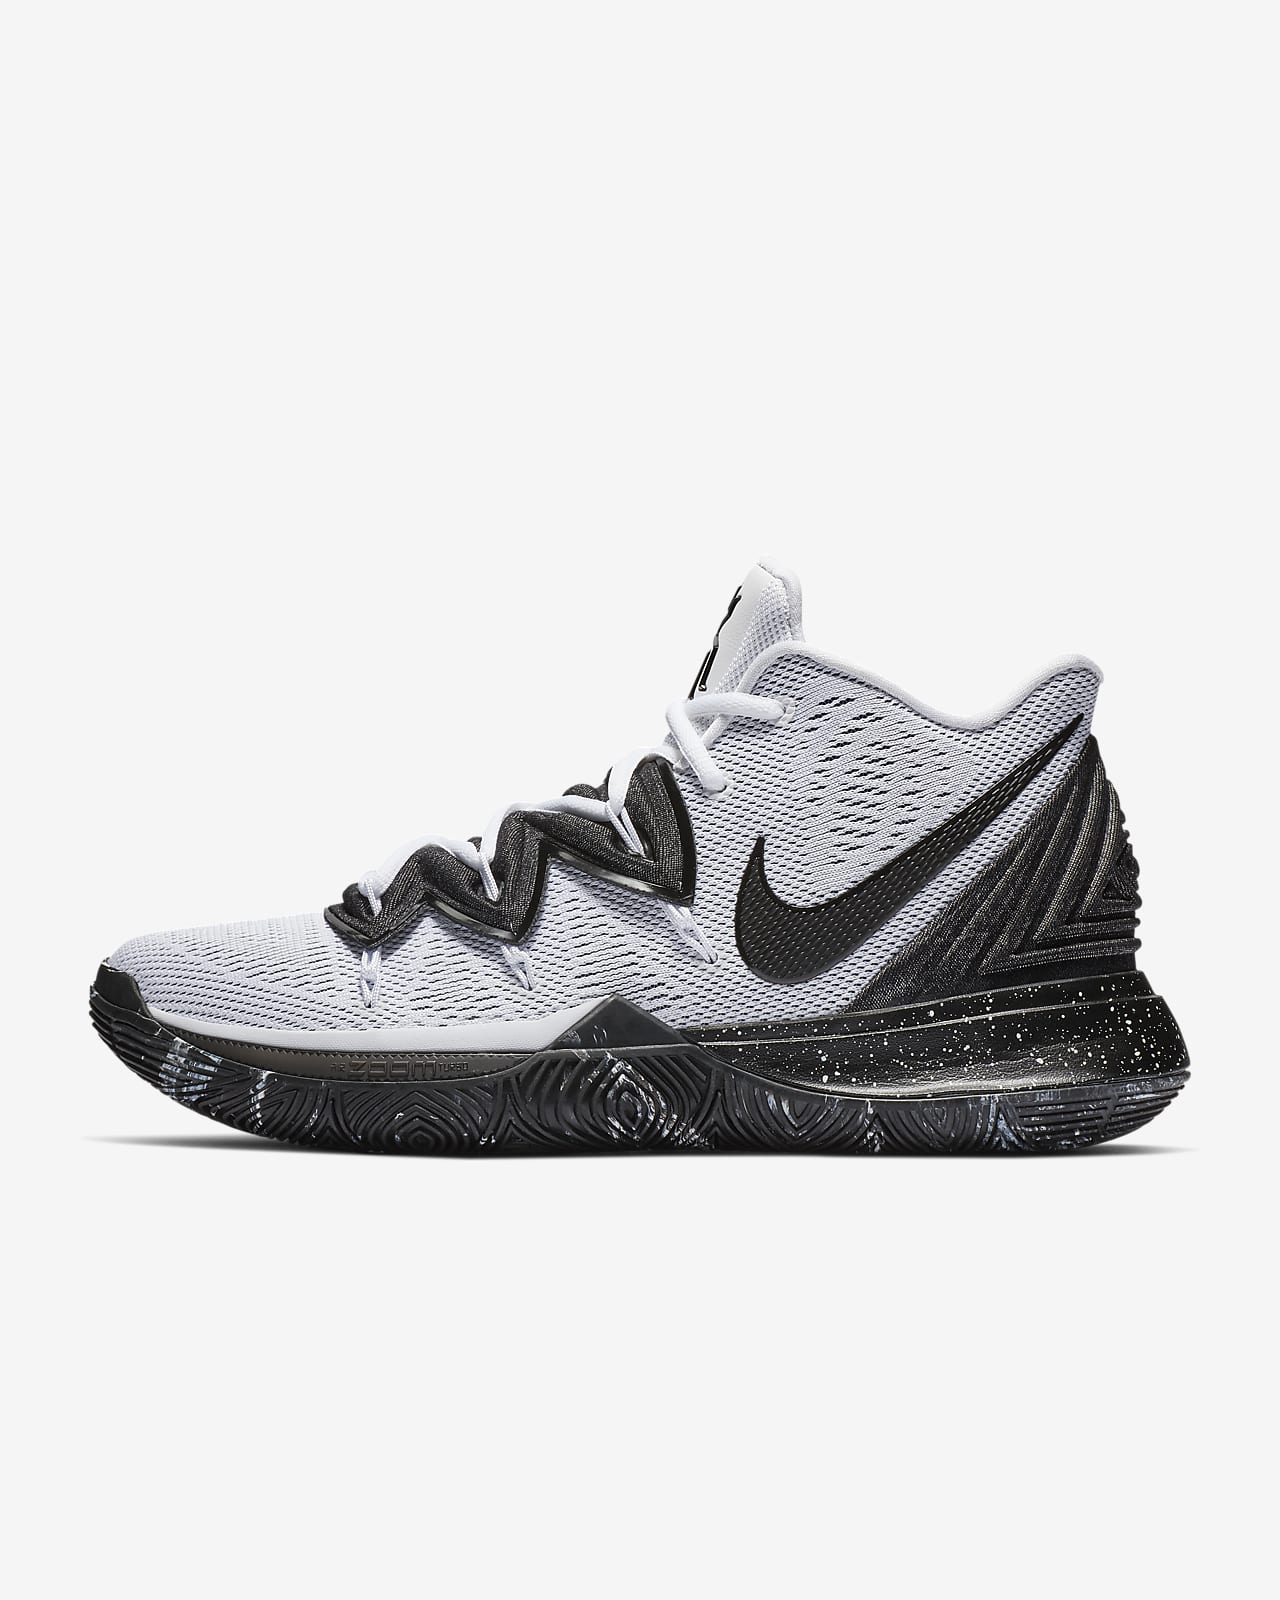 kyrie 5 size 5